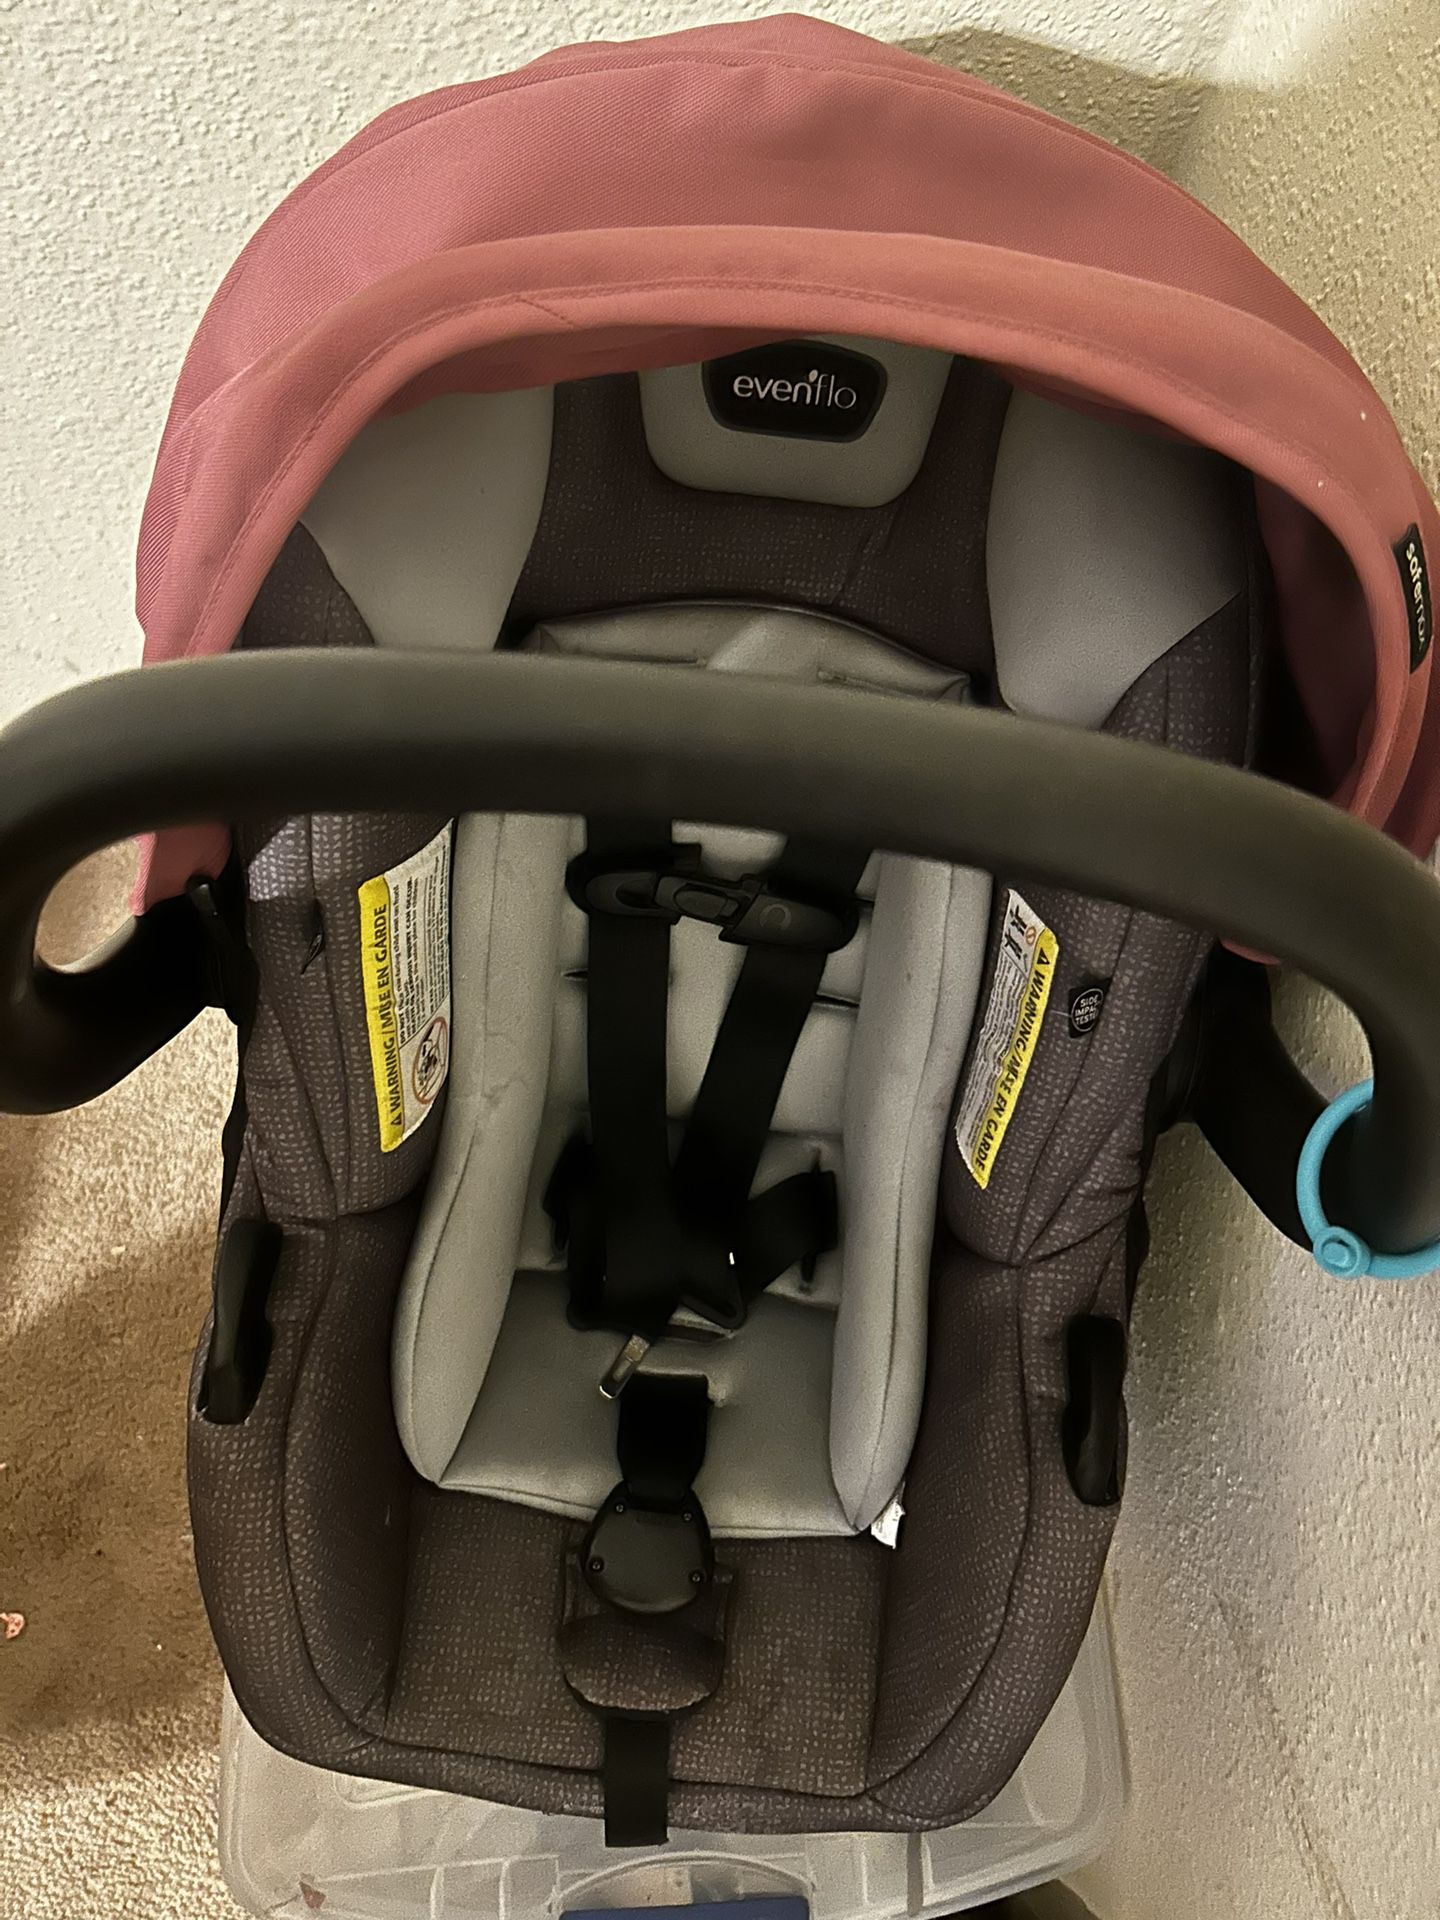 Infants Car Seat With Base 